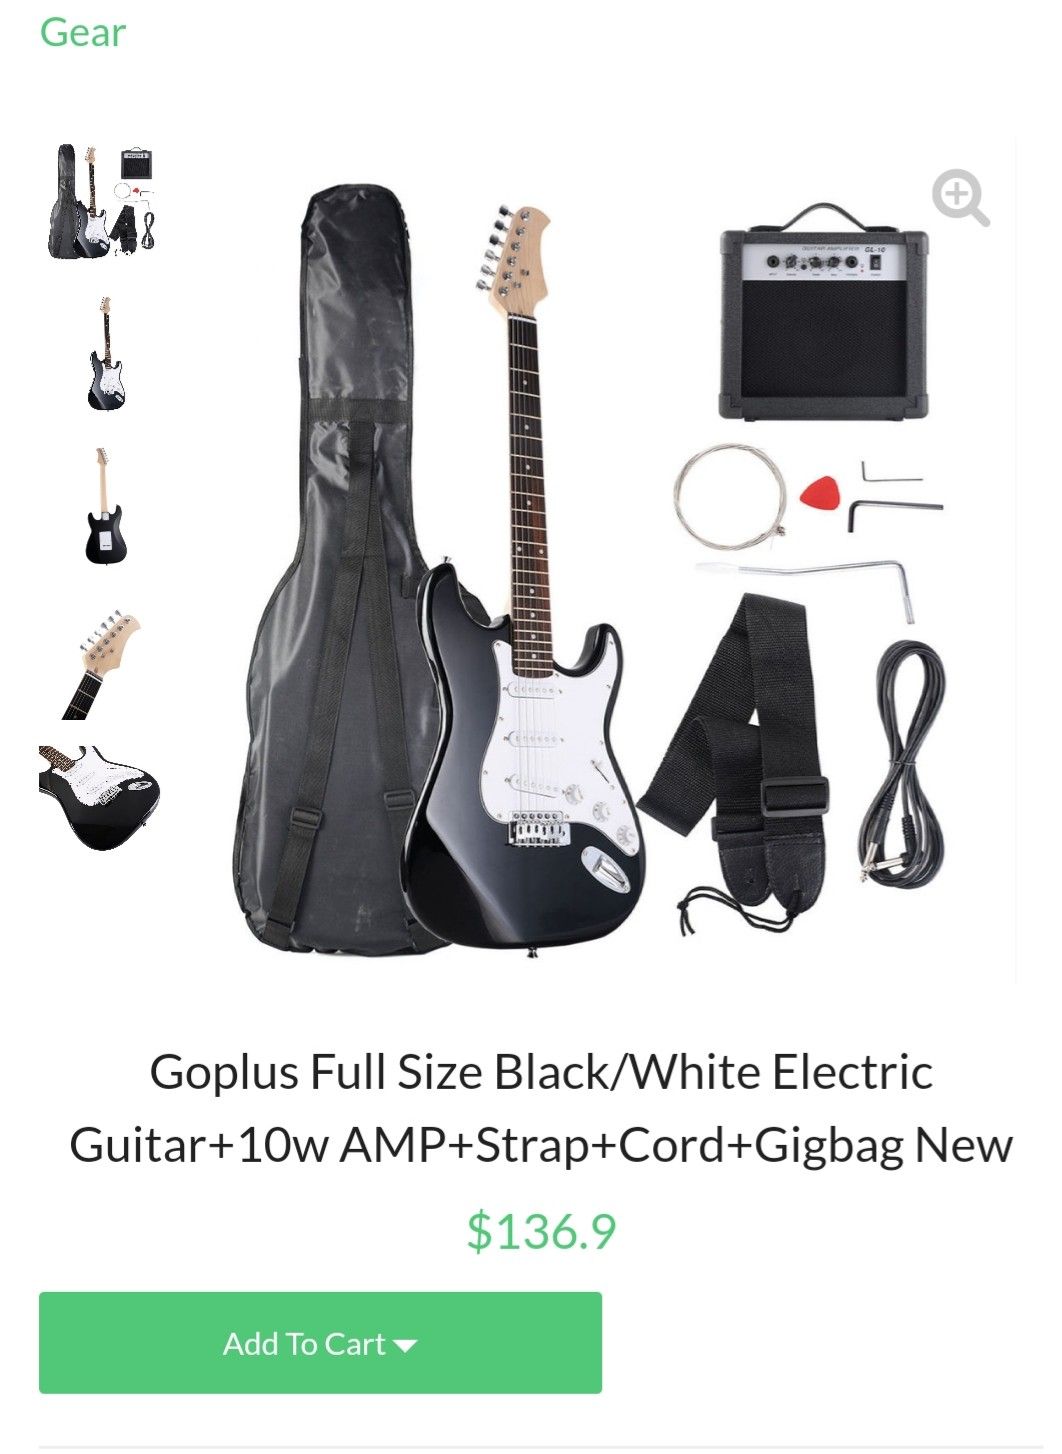 Full Size Black/White Electric Guitar+10w AMP+Strap+Cord+Gigbag New Retails 150 asking 100 please check other offers and follow